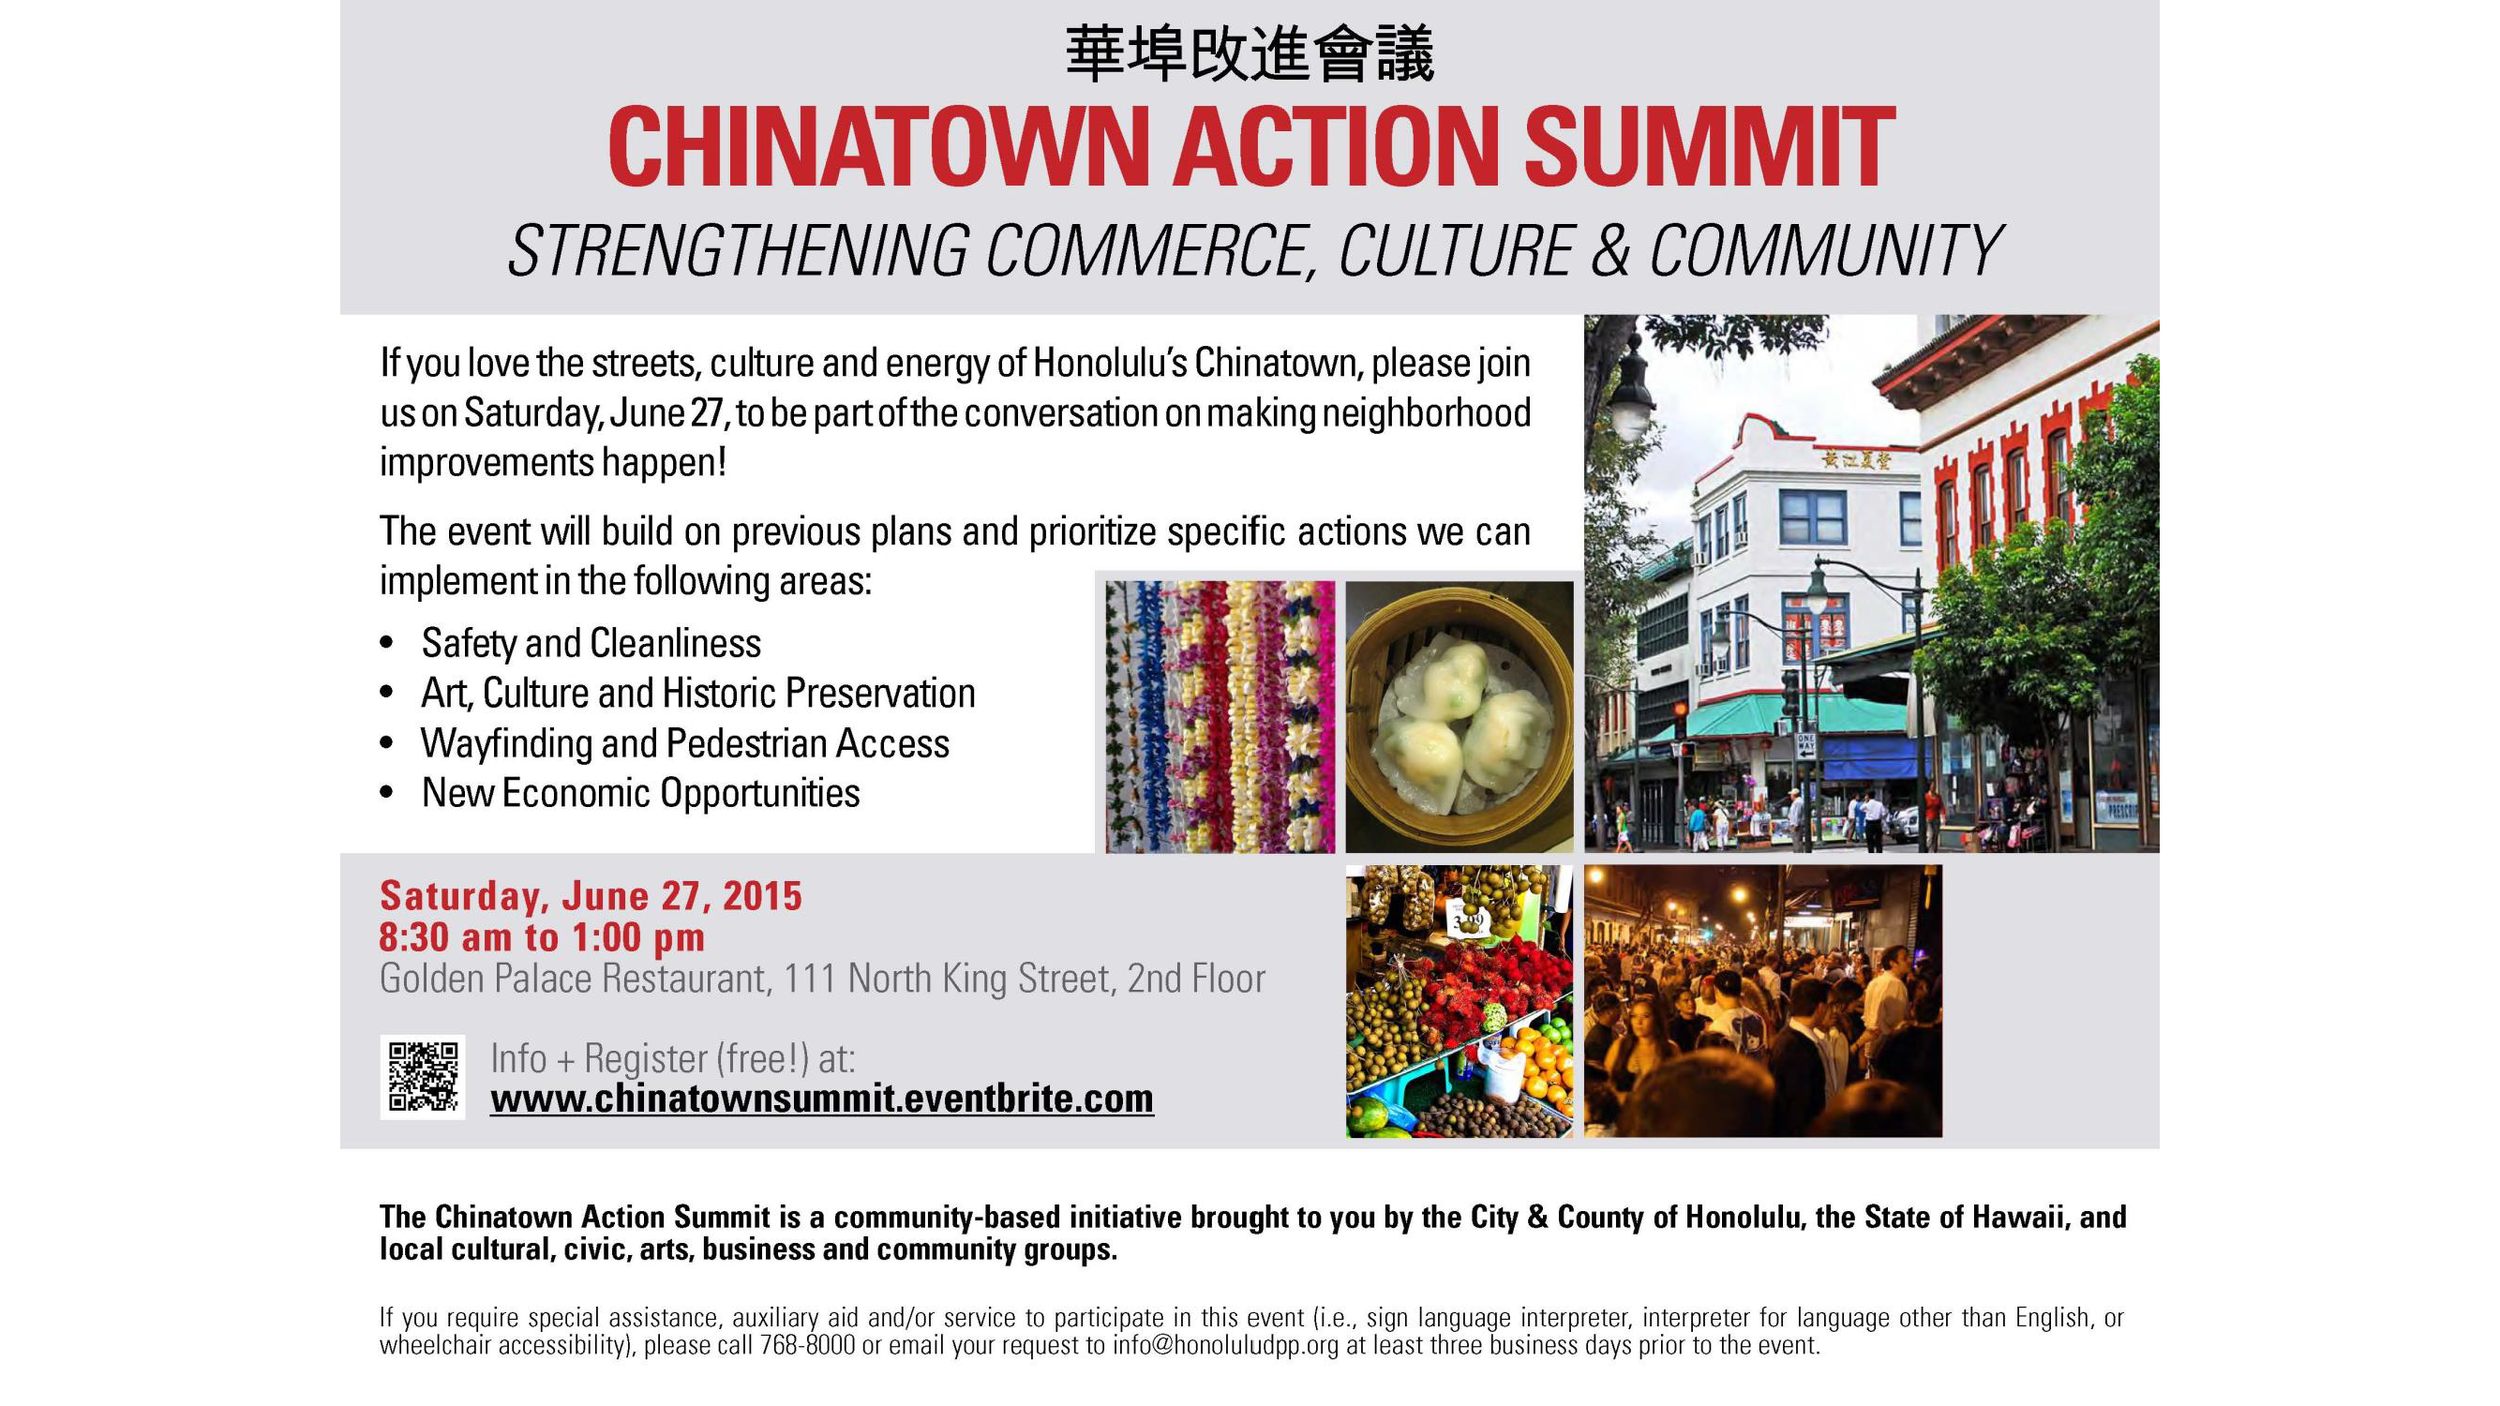 SHADE_PID_ASLA_ Chinatown presentation_150609_Page_24.png